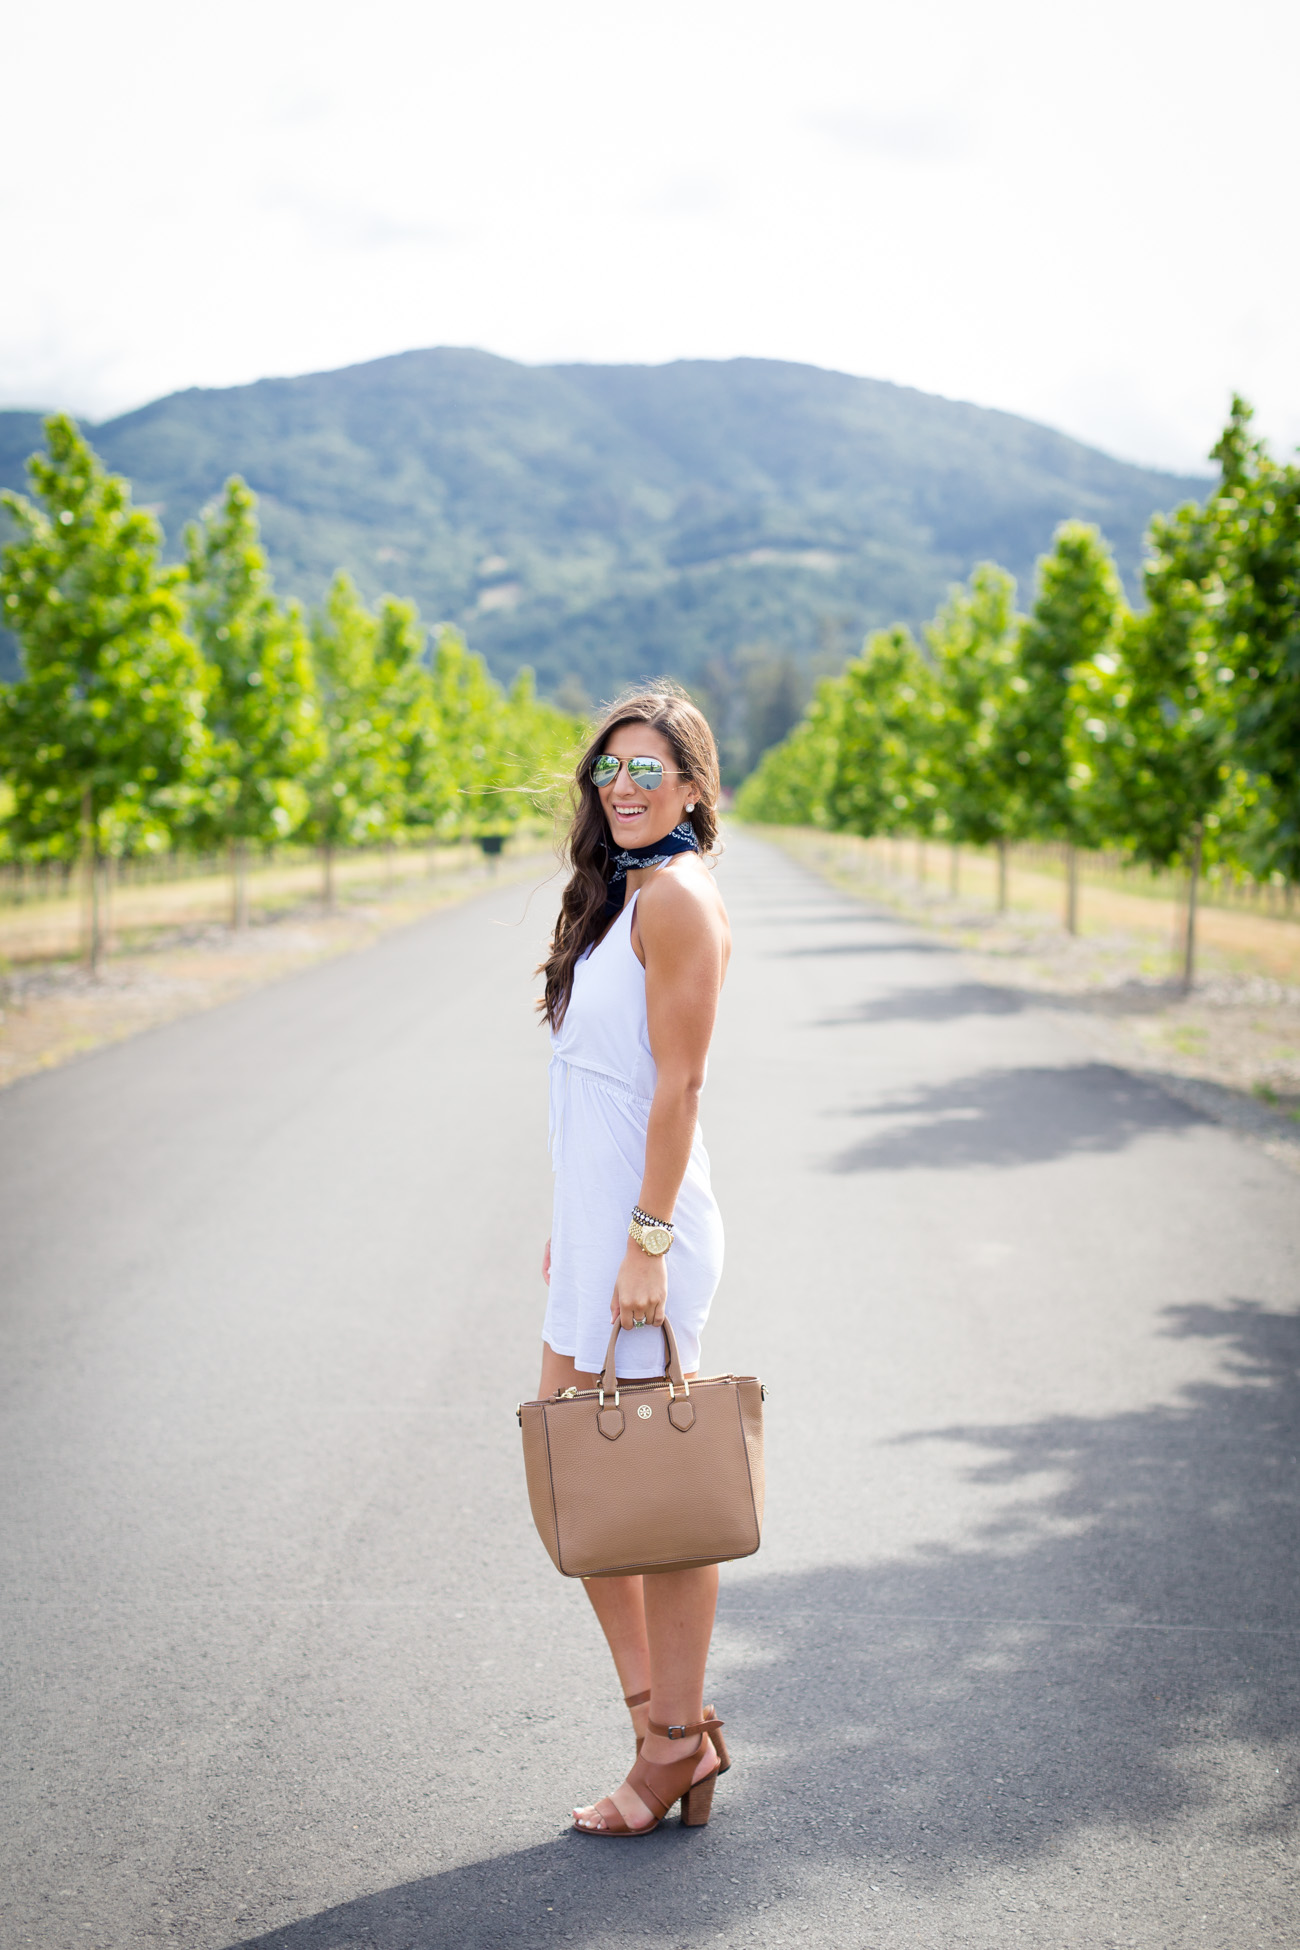 white tie halter dress, white dress, little white dress, napa valley, wine country, st helena california, bandana style, bandana around neck, french inspired outfit, casual outfit, cognac sandals, summer fashion, summer style, travel blogger, kentucky fashion blogger, front tie dress // grace wainwright a southern drawl